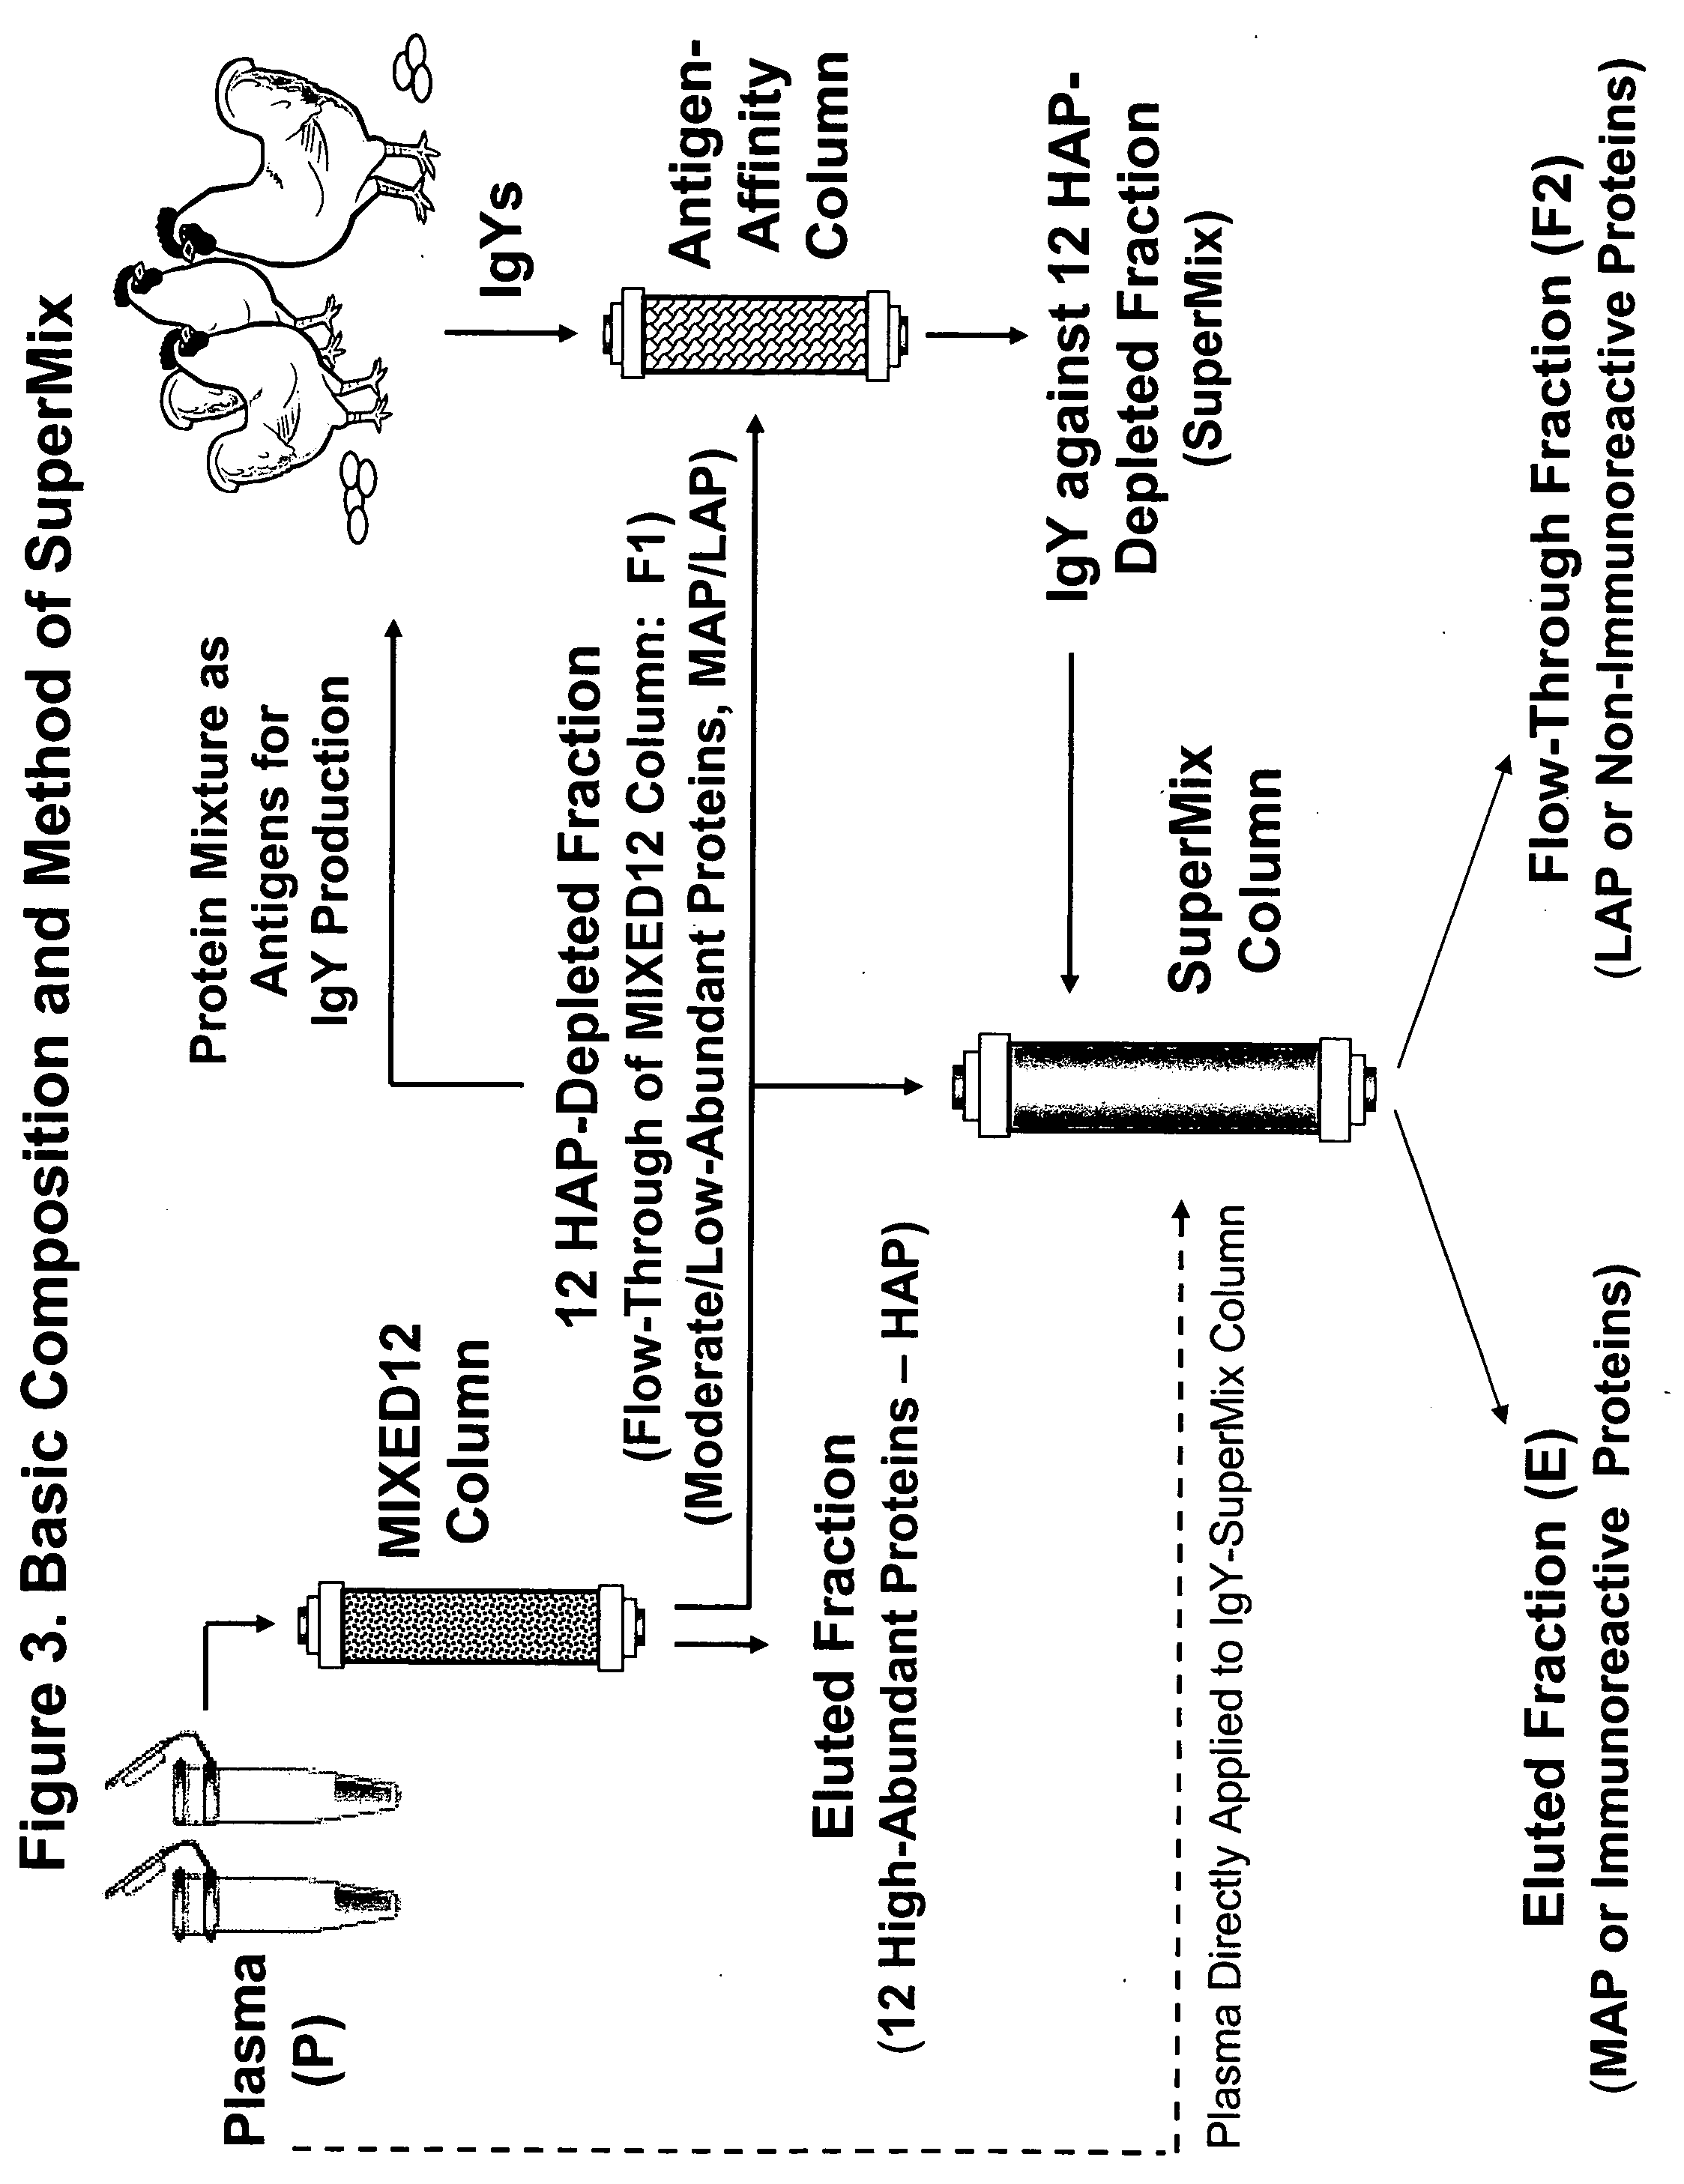 Immunoaffinity separation and analysis compositions and methods